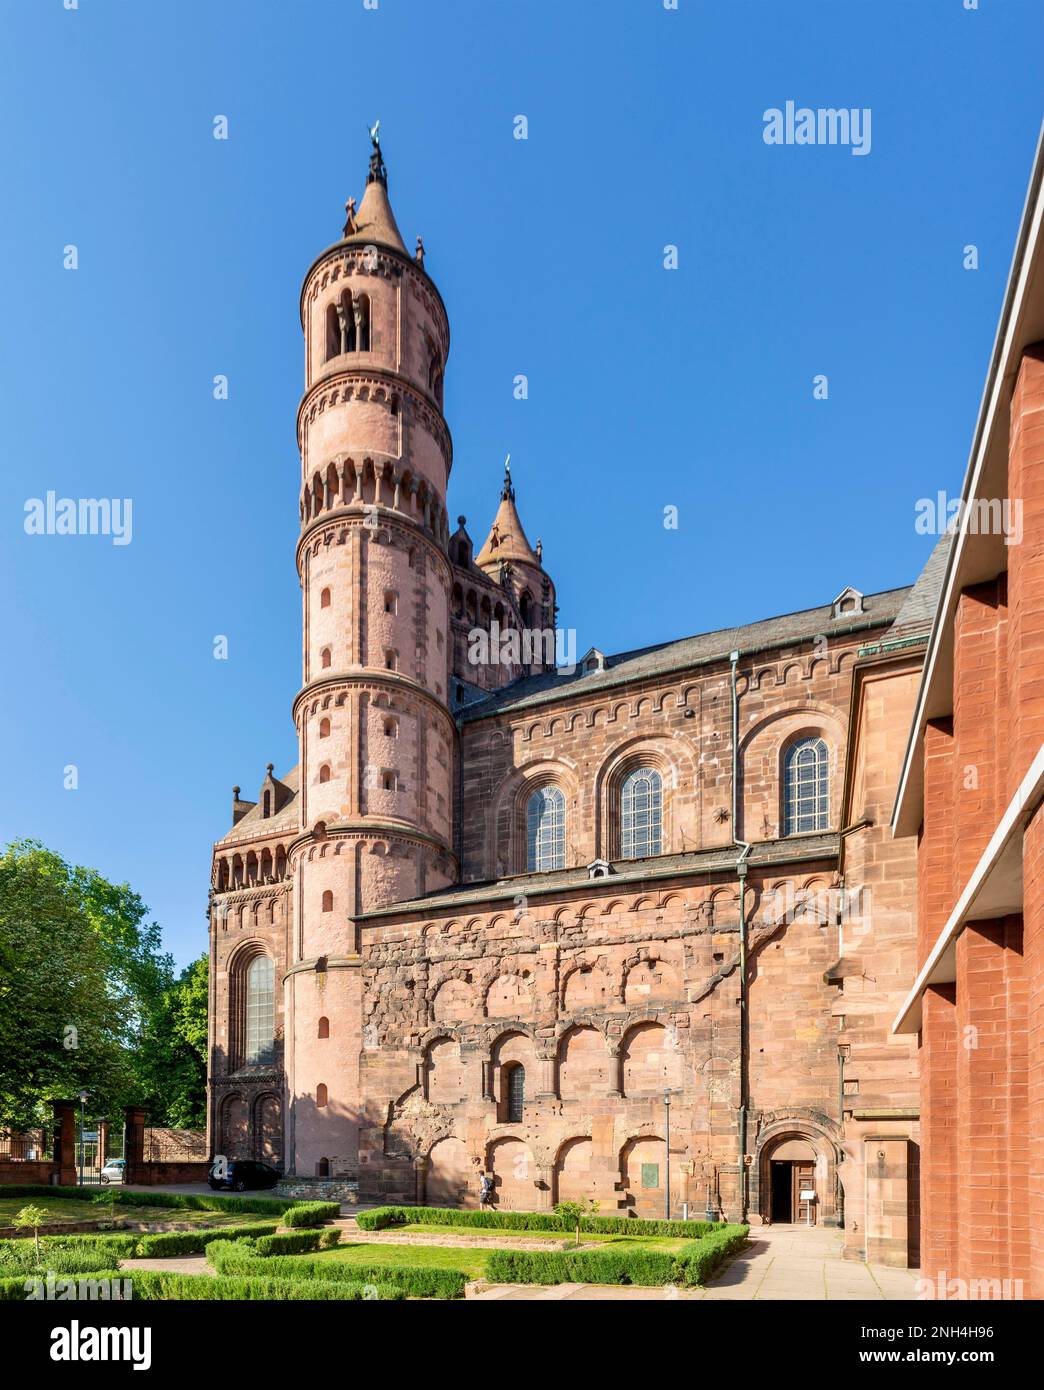 St Peters Cathedral, Worms, Renania-Palatinato, Germania Foto Stock